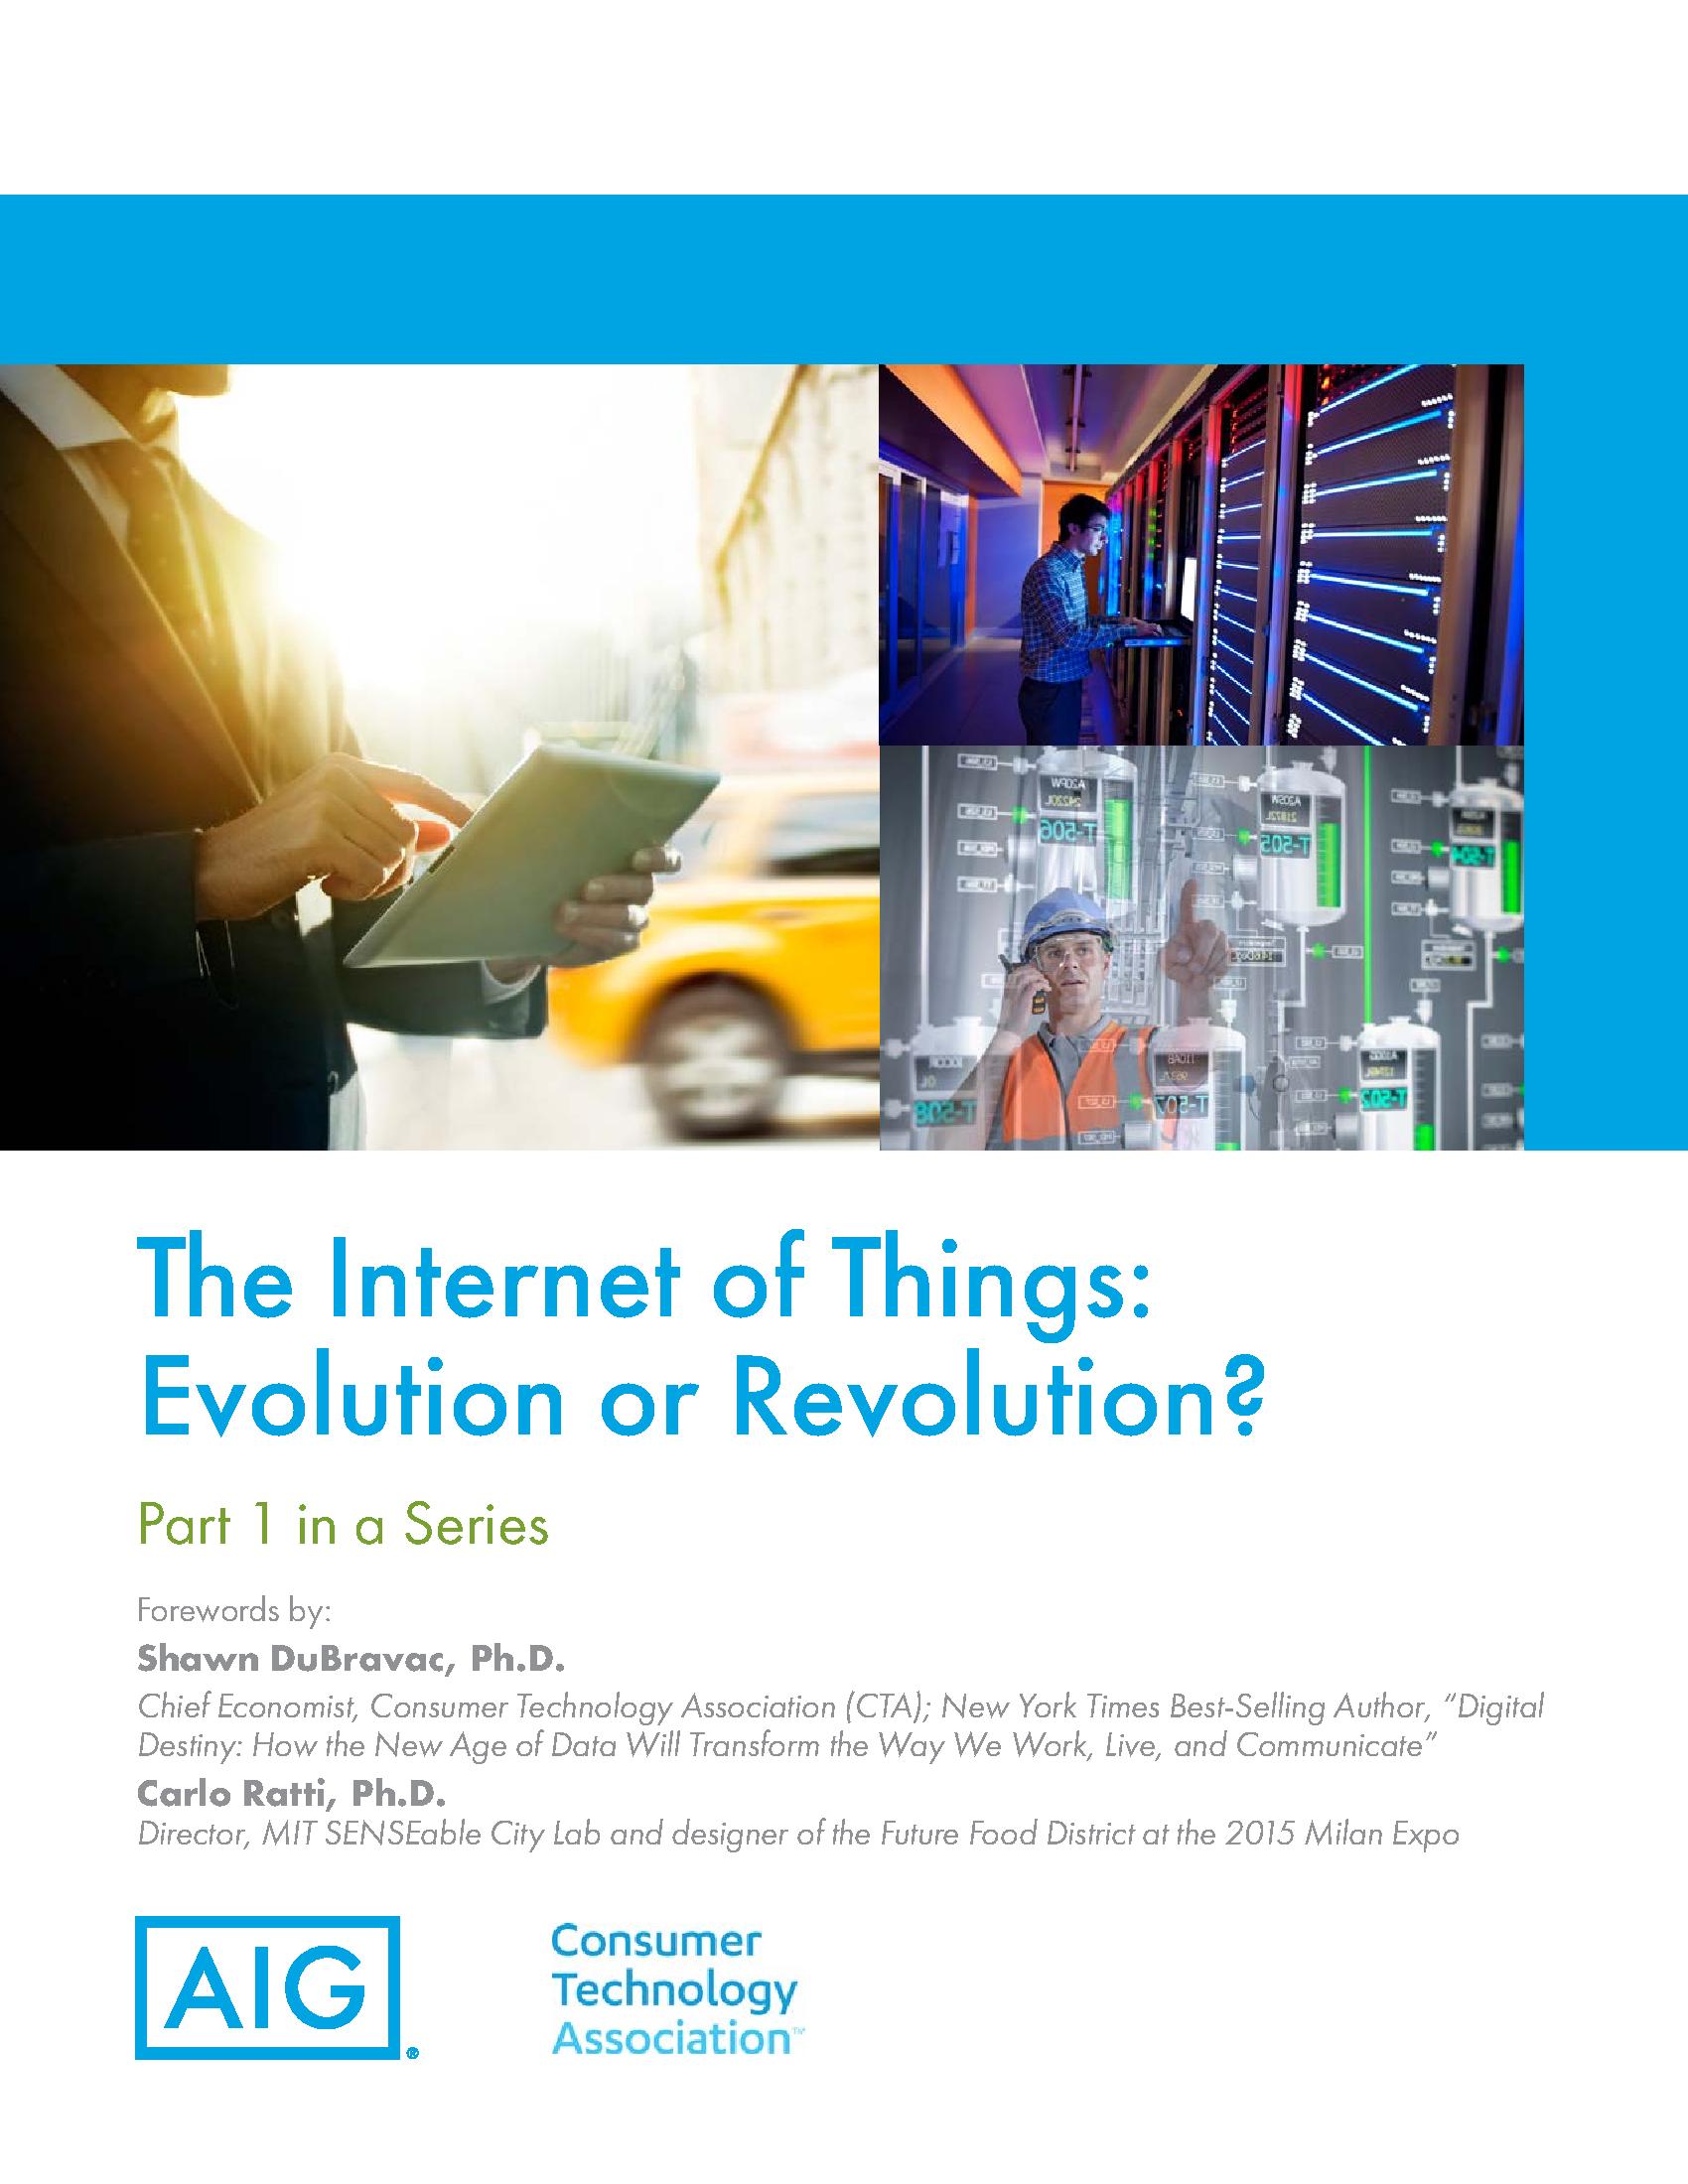 The Internet of Things: Evolution or Revolution?